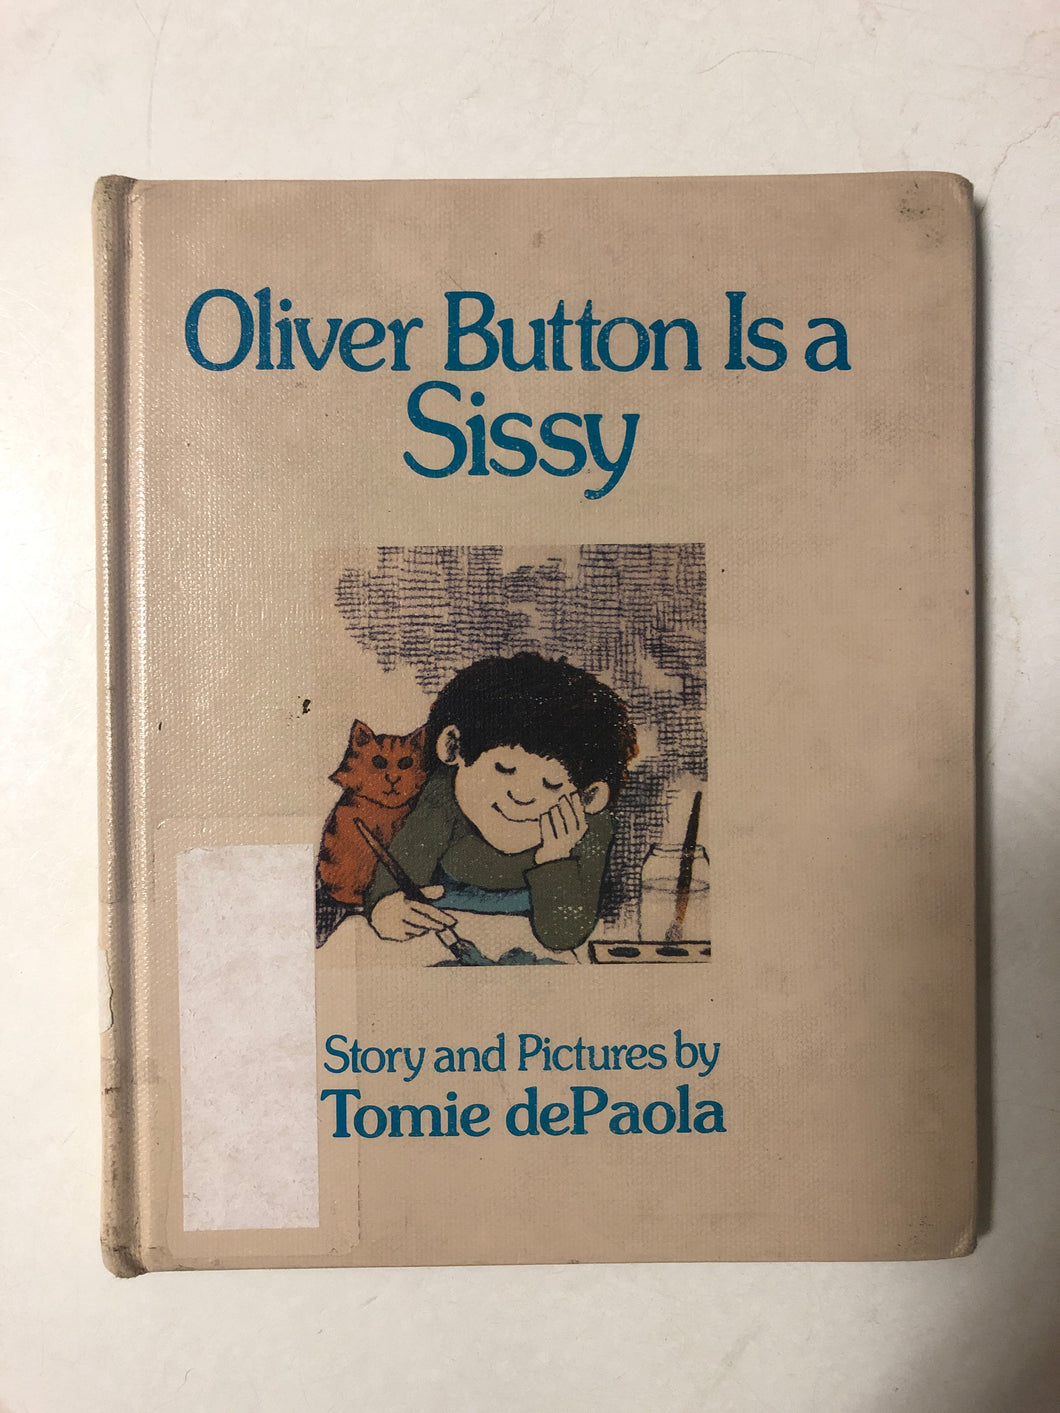 Oliver Button Is a Sissy - Slick Cat Books 